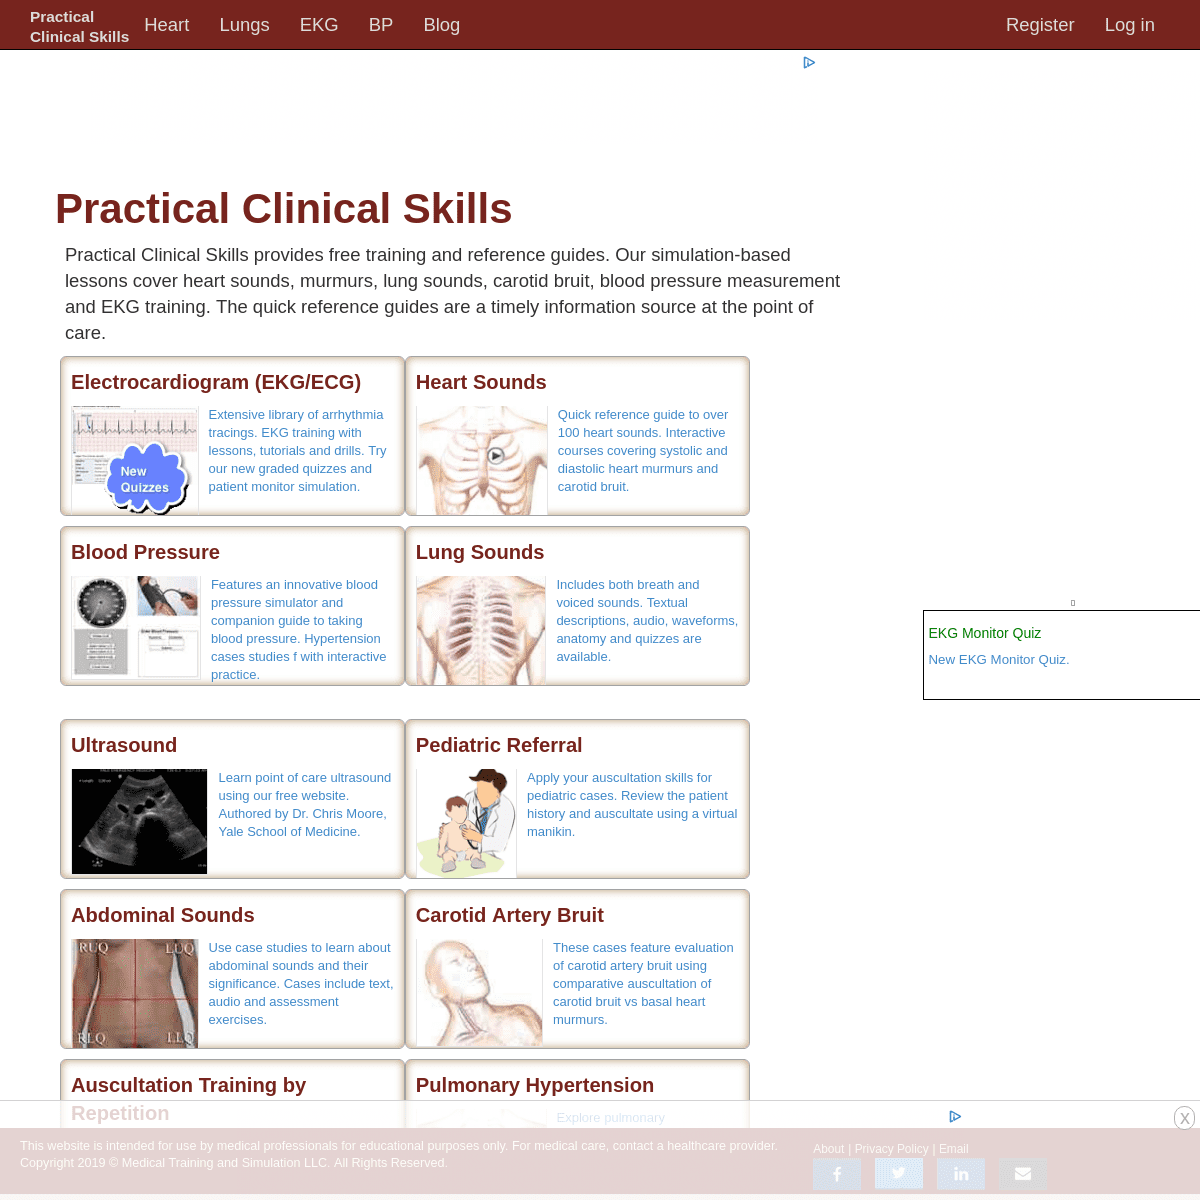 A complete backup of practicalclinicalskills.com